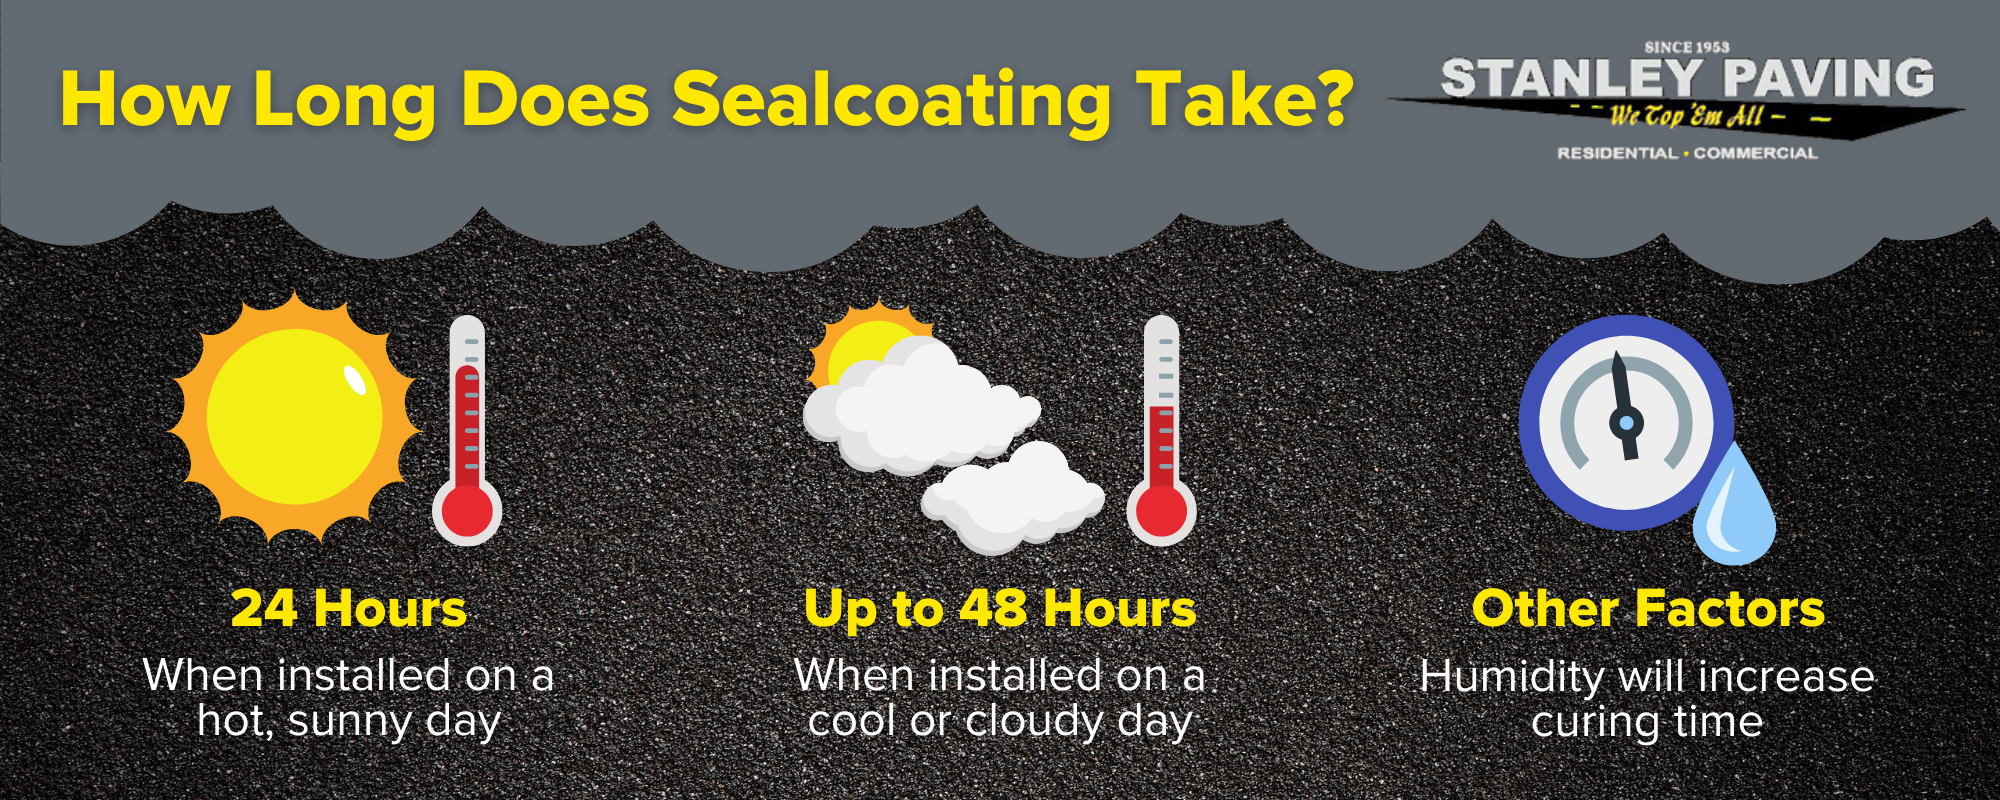 An infographic that says, "How Long Does Sealcoating Take? 24 Hours: When installed on a hot sunny day; Up to 48 Hours; When installed on a cool or cloudy day; Other Factors; Humidity will increase curing time